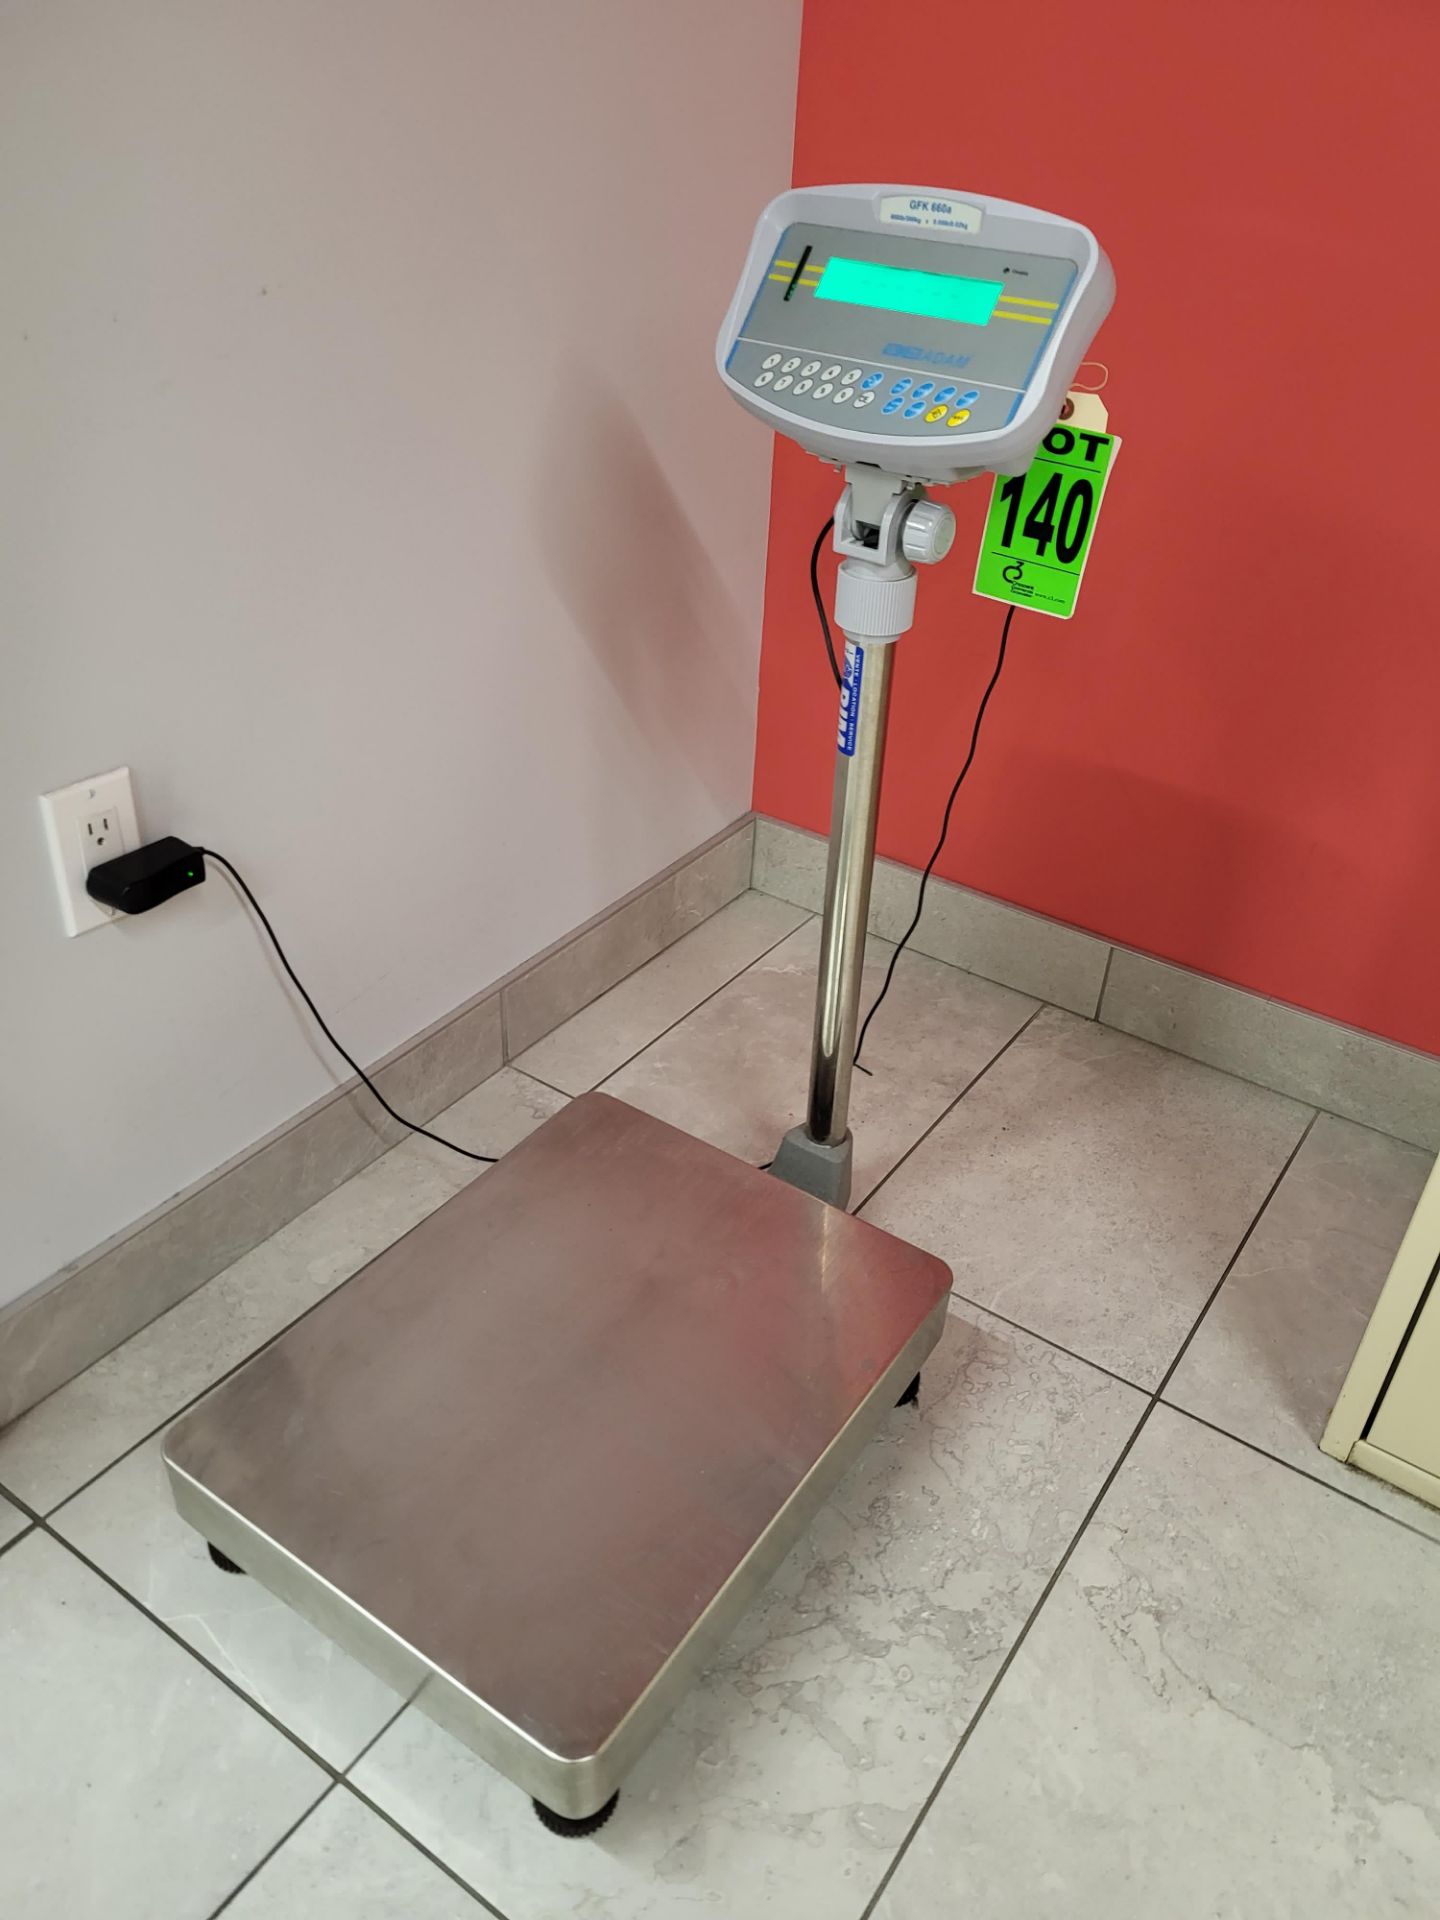 ADAM mod. GFK-660a Floor Checkweighing Scale, 660 lb / 300kg x 0.05lb/0.02kg - Image 4 of 6